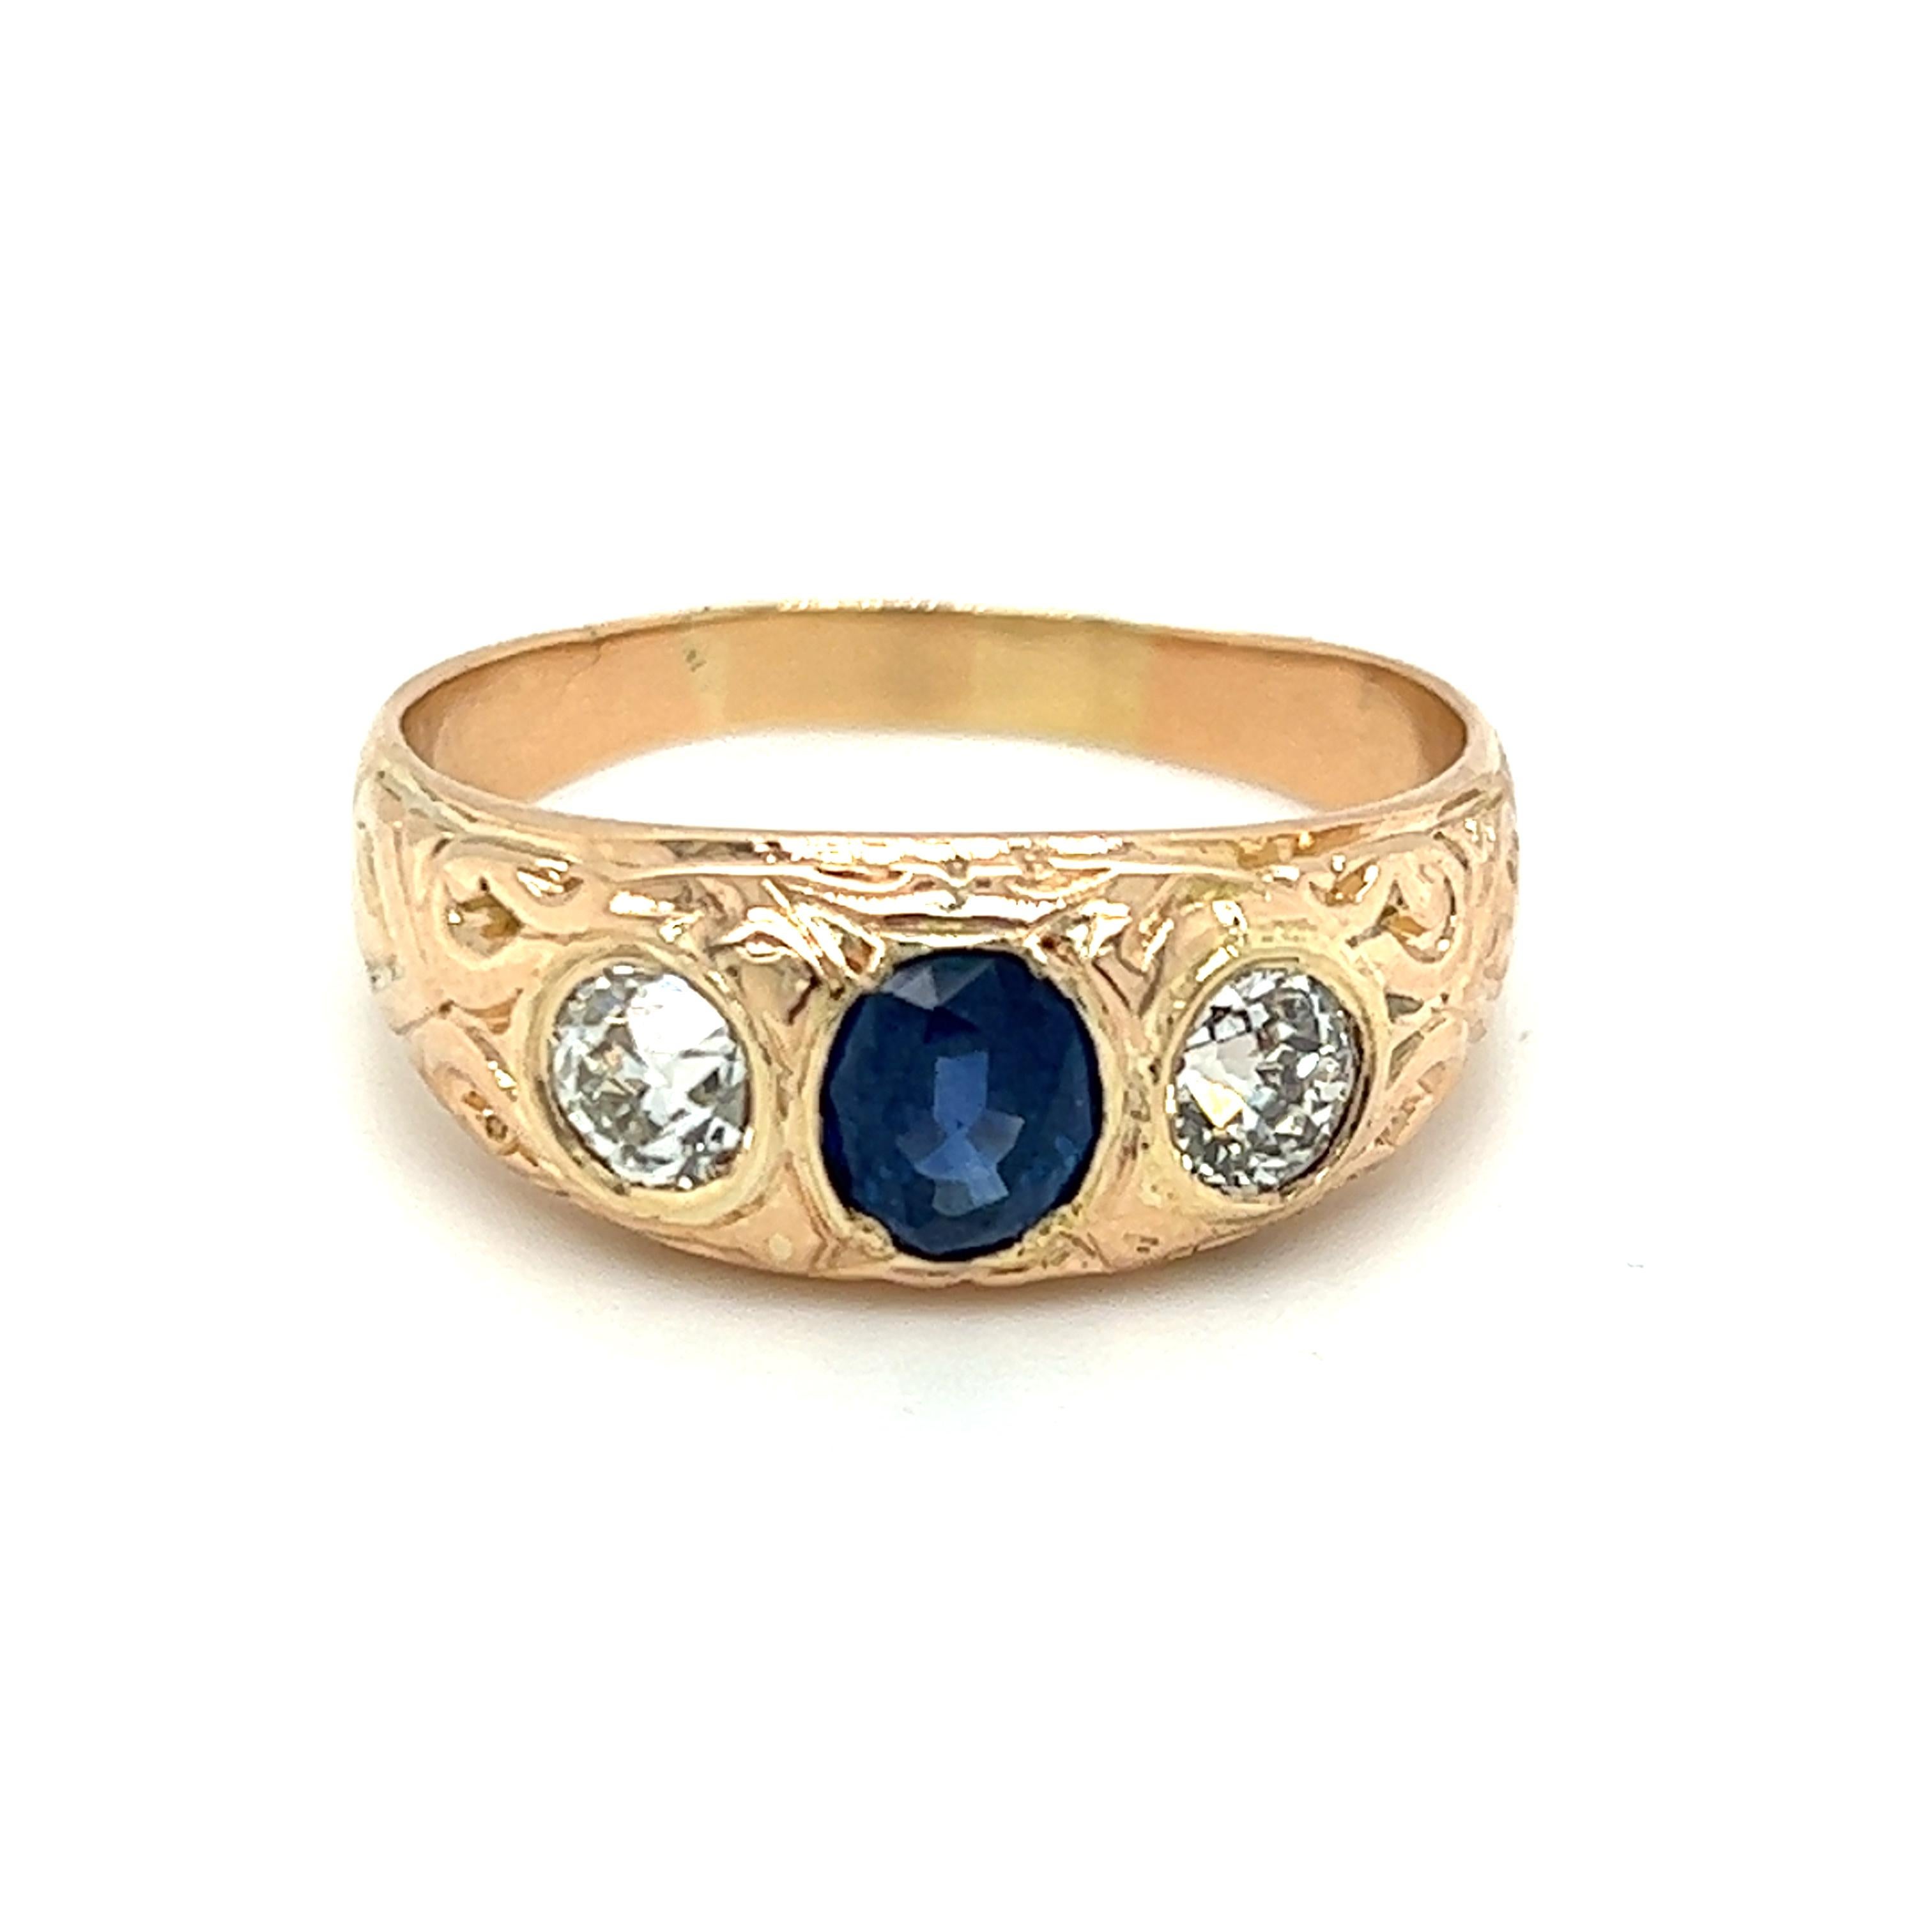 One 14 karat yellow gold Edwardian three stone ring, set with one (1) 6x5mm natural oval sapphire, flanked by two (2) 5.1mm old mine cut diamonds, approximately 1.00 carat total weight with matching IJK color and VVS2-SI1 clarity.  The ring is a